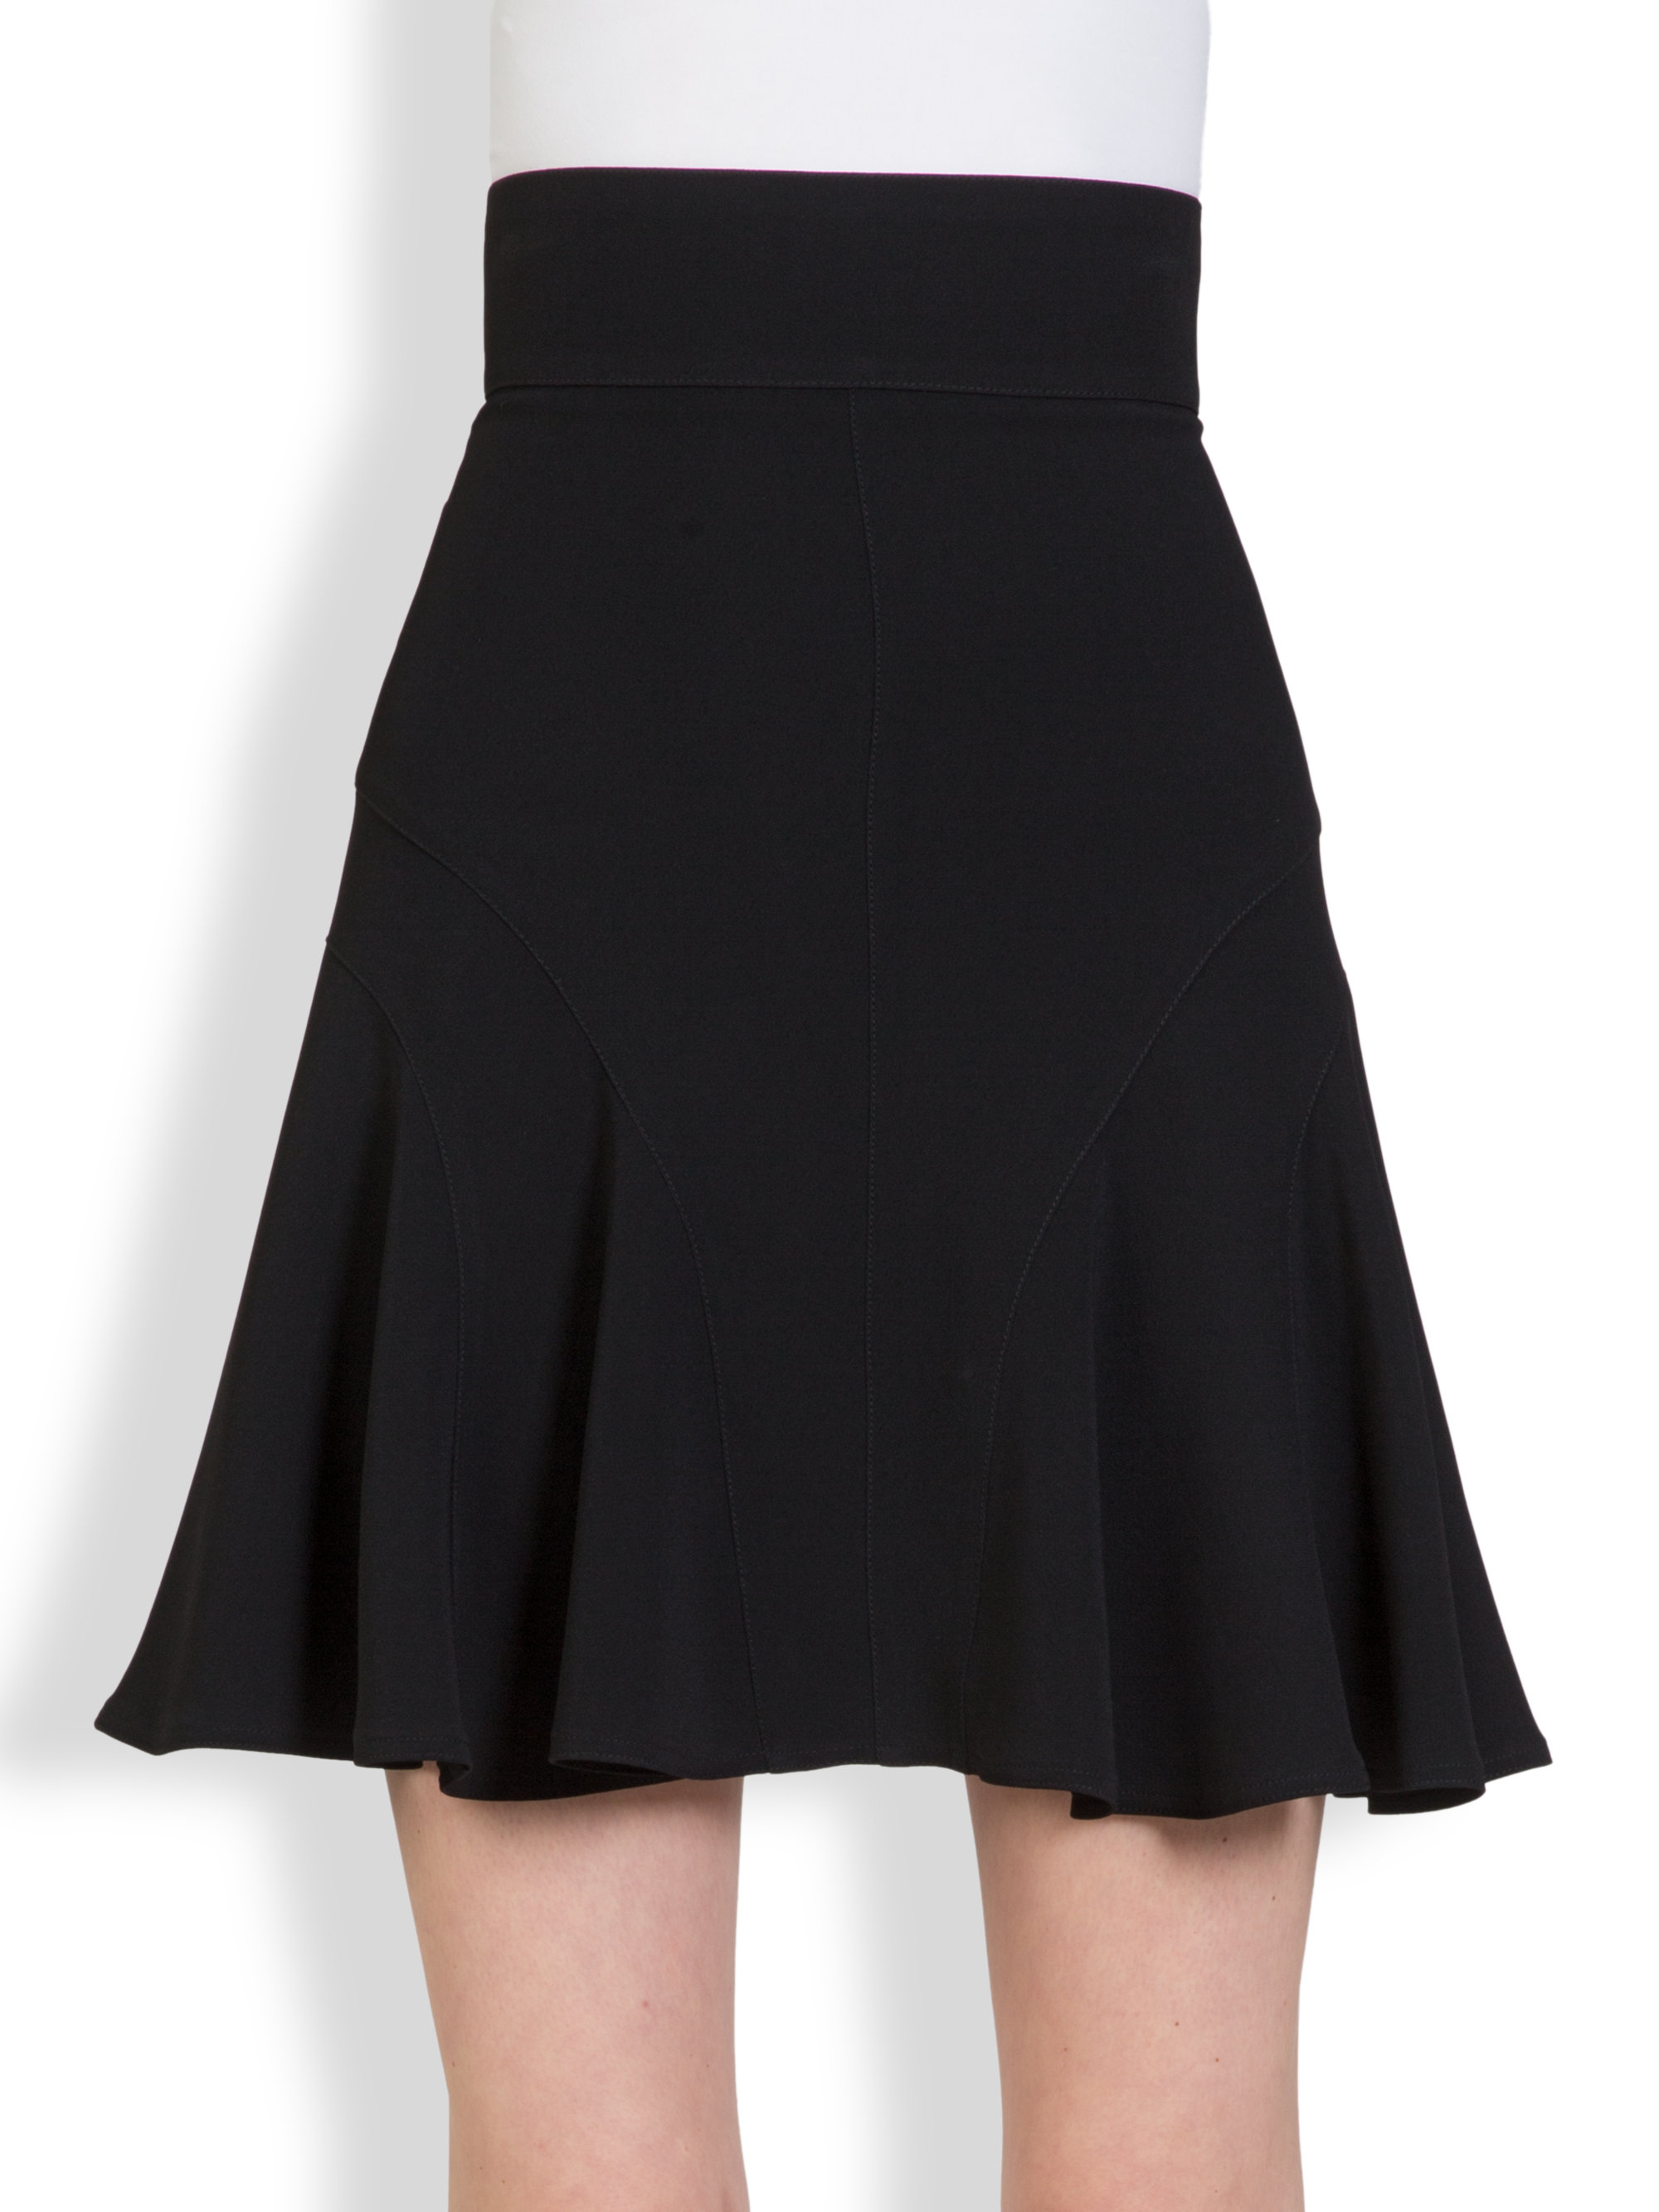 Lyst - Givenchy Crepe Tulip Skirt in Black